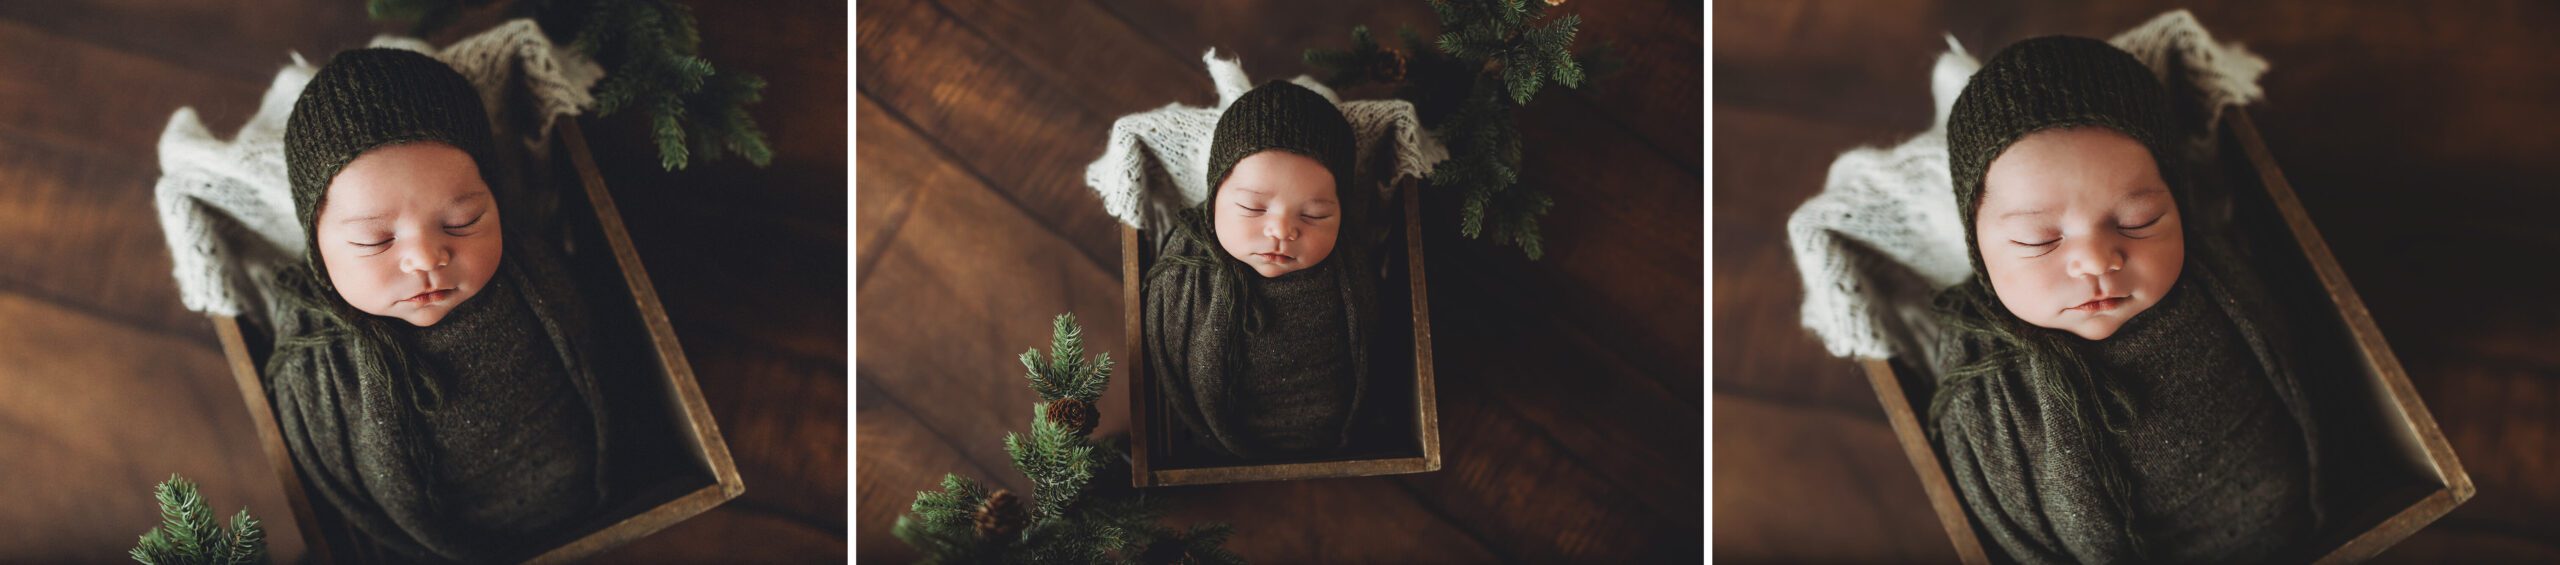 Newborn baby Oliver in sage green with a matching cap in wood and greenery